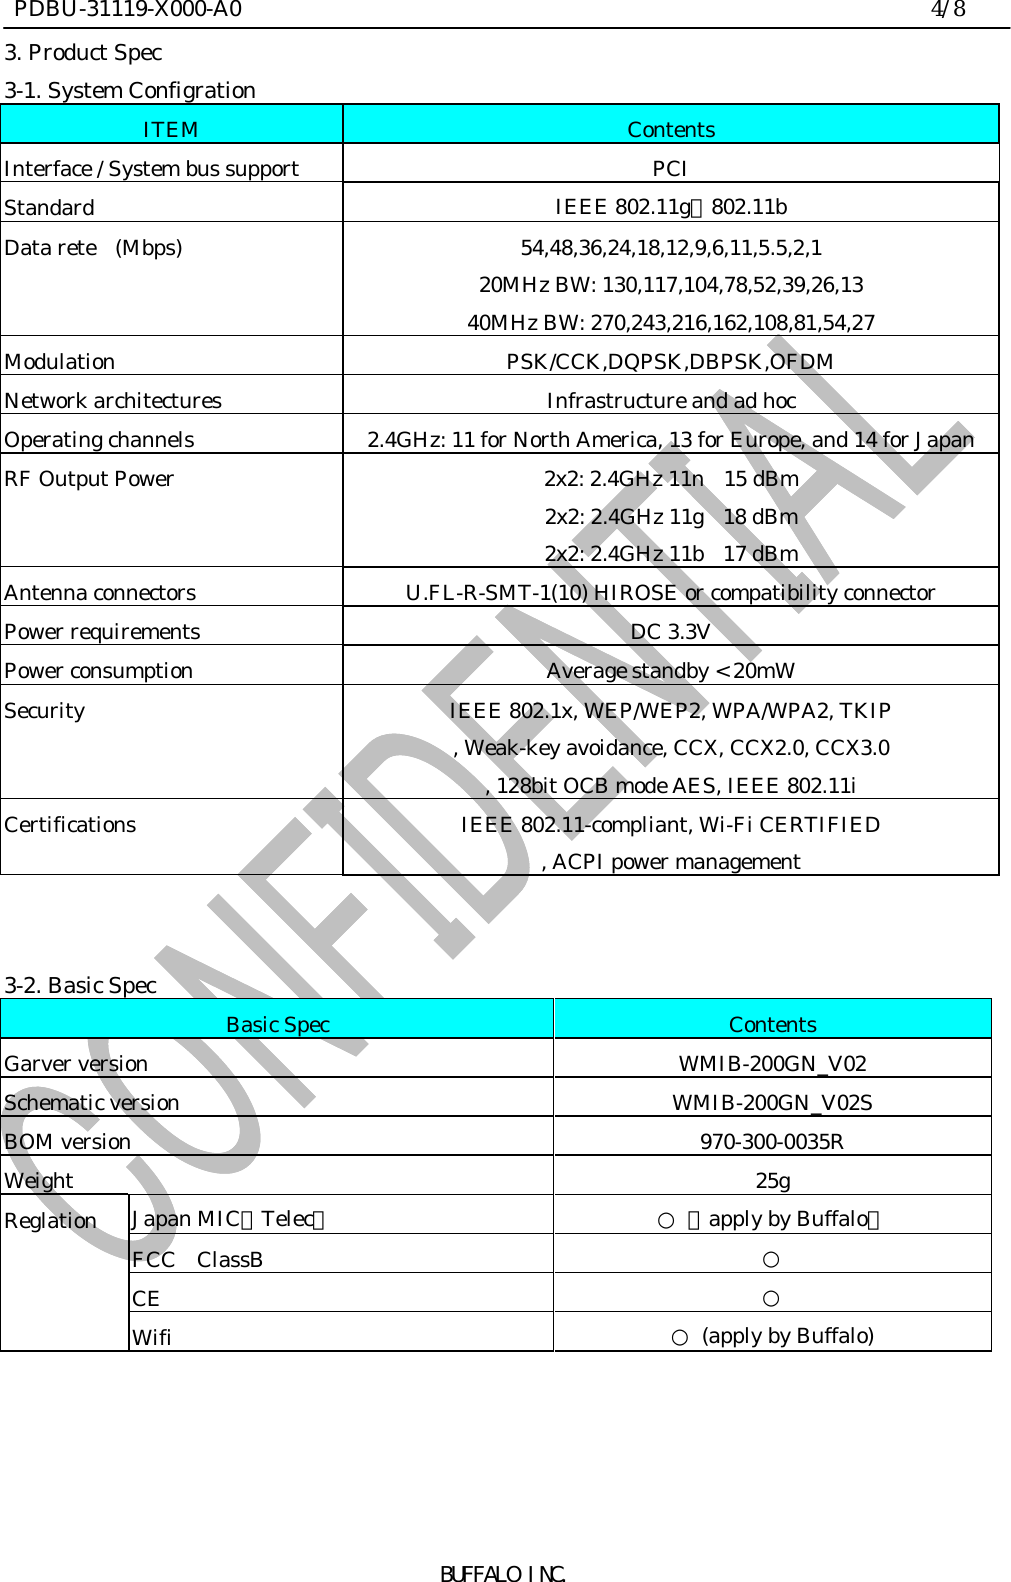  PDBU-31119-X000-A0                                                                4/8BUFFALO INC.3. Product Spec3-1. System ConfigrationITEM ContentsInterface / System bus support PCIStandard IEEE 802.11g、802.11bData rete  (Mbps)  54,48,36,24,18,12,9,6,11,5.5,2,120MHz BW: 130,117,104,78,52,39,26,1340MHz BW: 270,243,216,162,108,81,54,27Modulation PSK/CCK,DQPSK,DBPSK,OFDMNetwork architectures Infrastructure and ad hocOperating channels 2.4GHz: 11 for North America, 13 for Europe, and 14 for JapanRF Output Power 2x2: 2.4GHz 11n  15 dBm2x2: 2.4GHz 11g  18 dBm2x2: 2.4GHz 11b  17 dBmAntenna connectors U.FL-R-SMT-1(10) HIROSE or compatibility connectorPower requirements DC 3.3VPower consumption Average standby &lt; 20mWSecurity IEEE 802.1x, WEP/WEP2, WPA/WPA2, TKIP, Weak-key avoidance, CCX, CCX2.0, CCX3.0, 128bit OCB mode AES, IEEE 802.11iCertifications IEEE 802.11-compliant, Wi-Fi CERTIFIED, ACPI power management3-2. Basic SpecBasic Spec ContentsGarver version WMIB-200GN_V02Schematic version  WMIB-200GN_V02SBOM version  970-300-0035RWeight 25gReglation Japan MIC（Telec） ○ （apply by Buffalo）FCC ClassB ○CE ○Wifi ○ (apply by Buffalo)